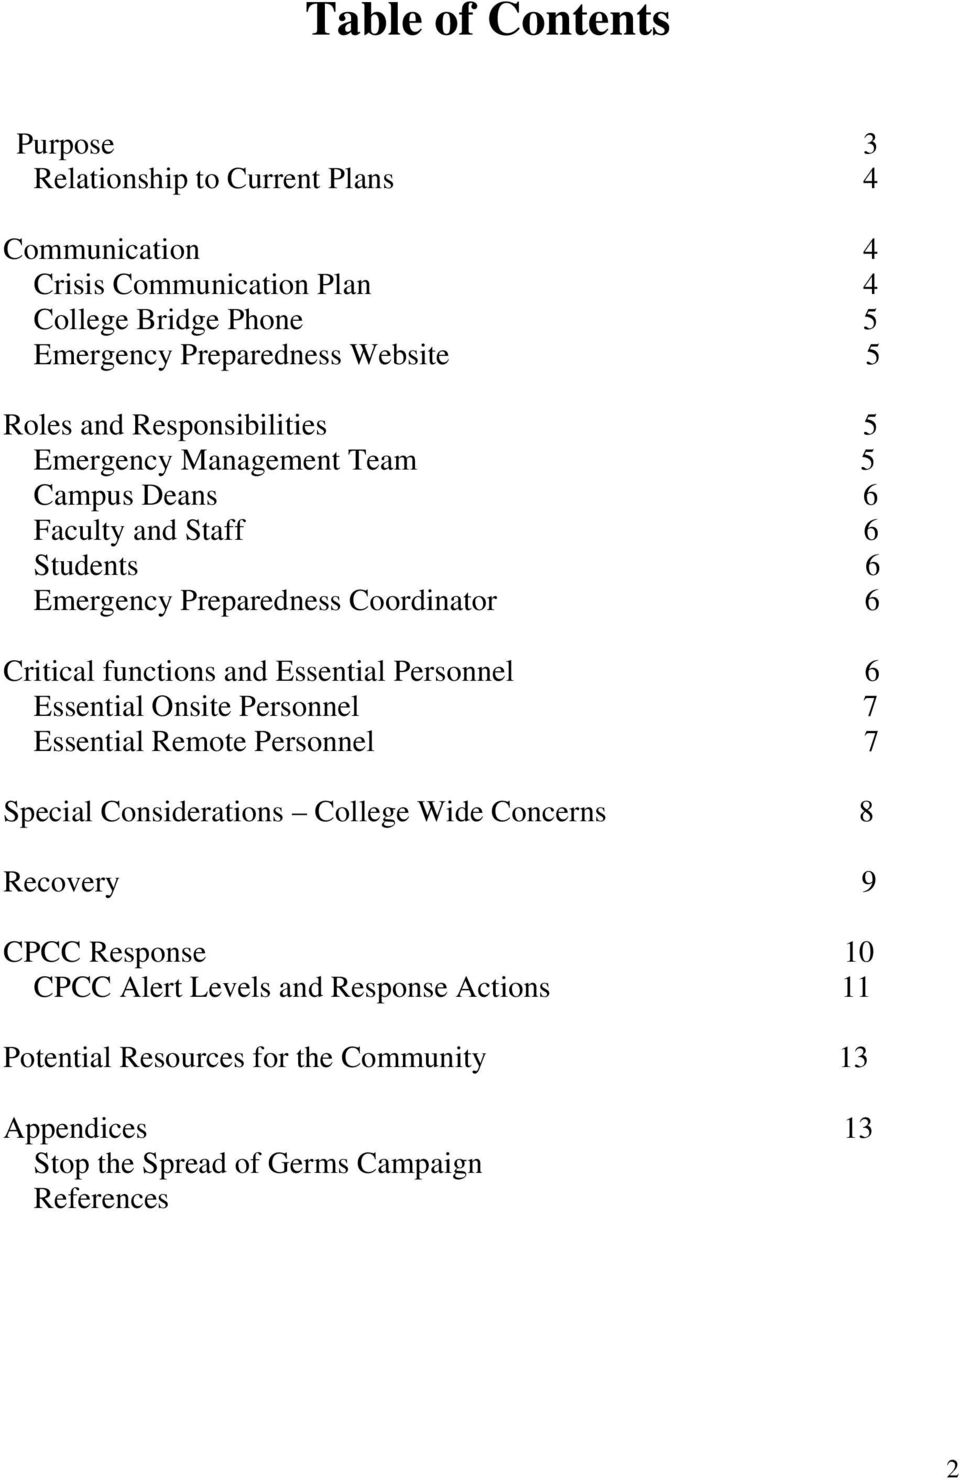 Critical functions and Essential Personnel 6 Essential Onsite Personnel 7 Essential Remote Personnel 7 Special Considerations College Wide Concerns 8